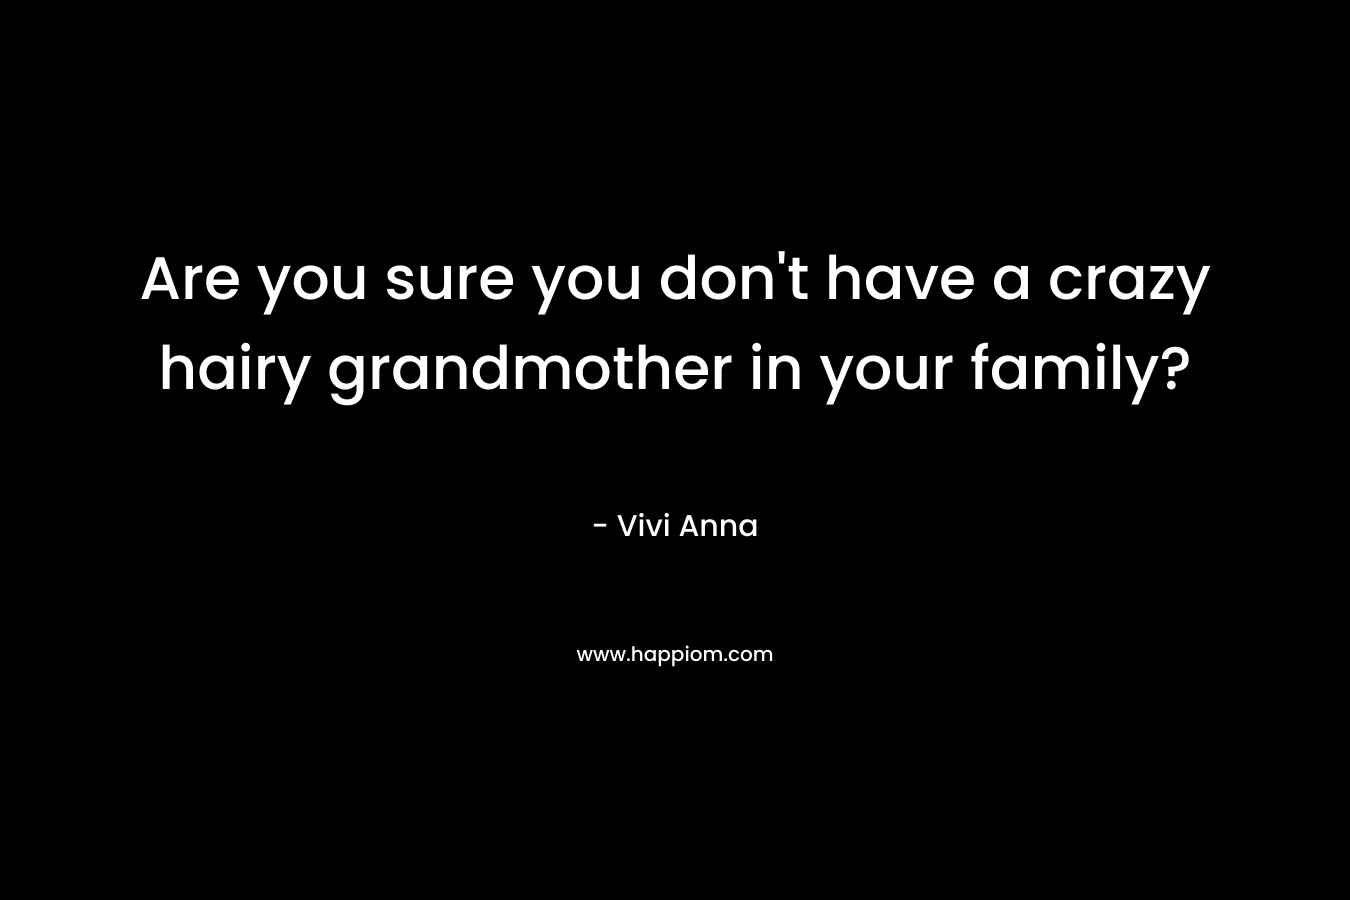 Are you sure you don’t have a crazy hairy grandmother in your family? – Vivi Anna